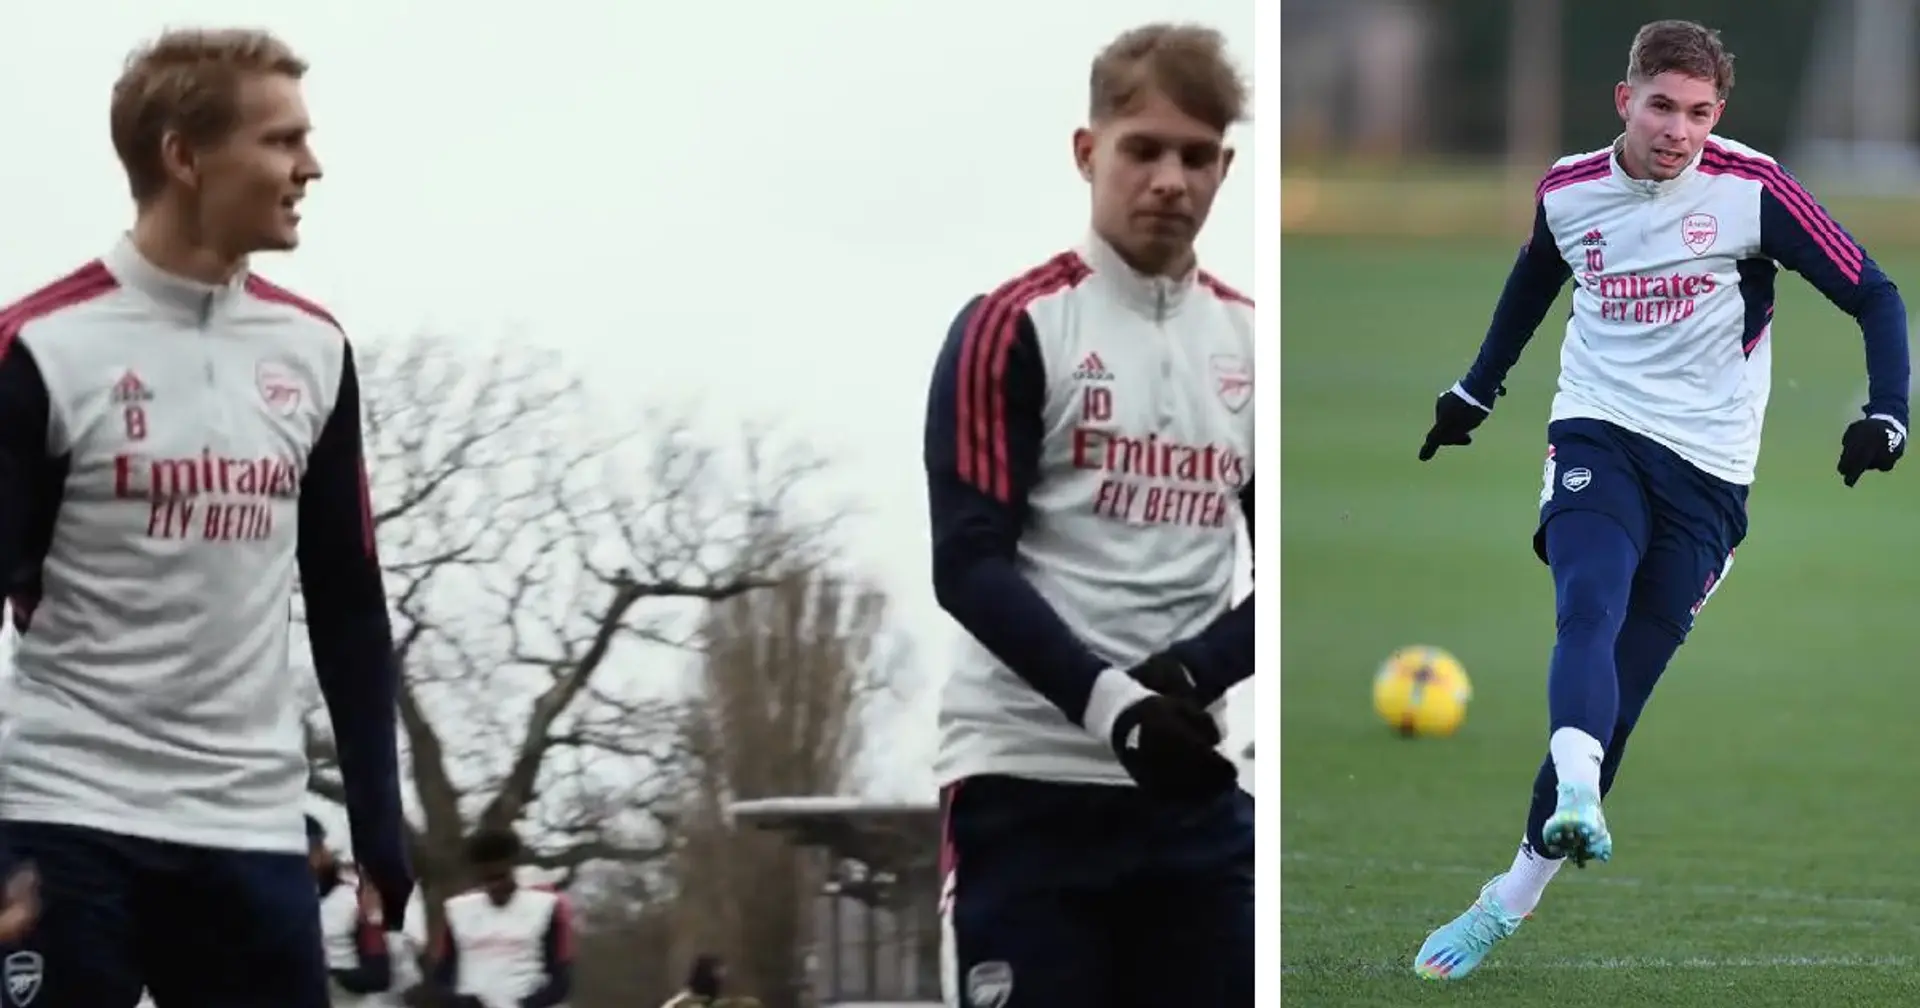 Smith Rowe returns to training, first words revealed - it's about Odegaard